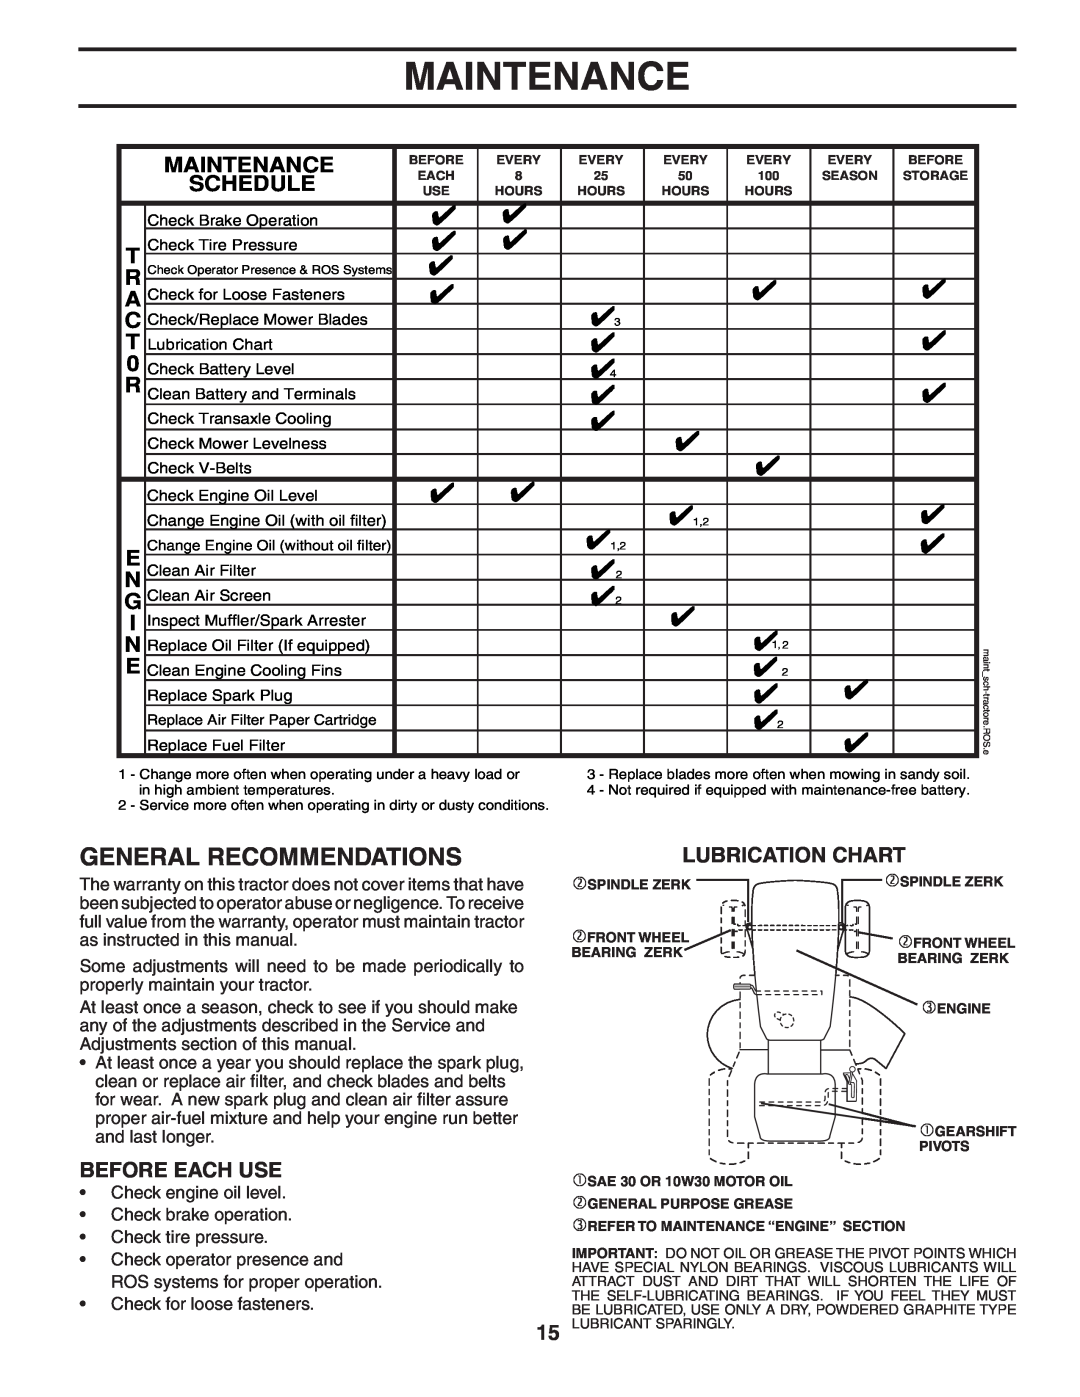 Weed Eater 405209, 60614 manual Maintenance, Lubrication Chart, Before Each Use 